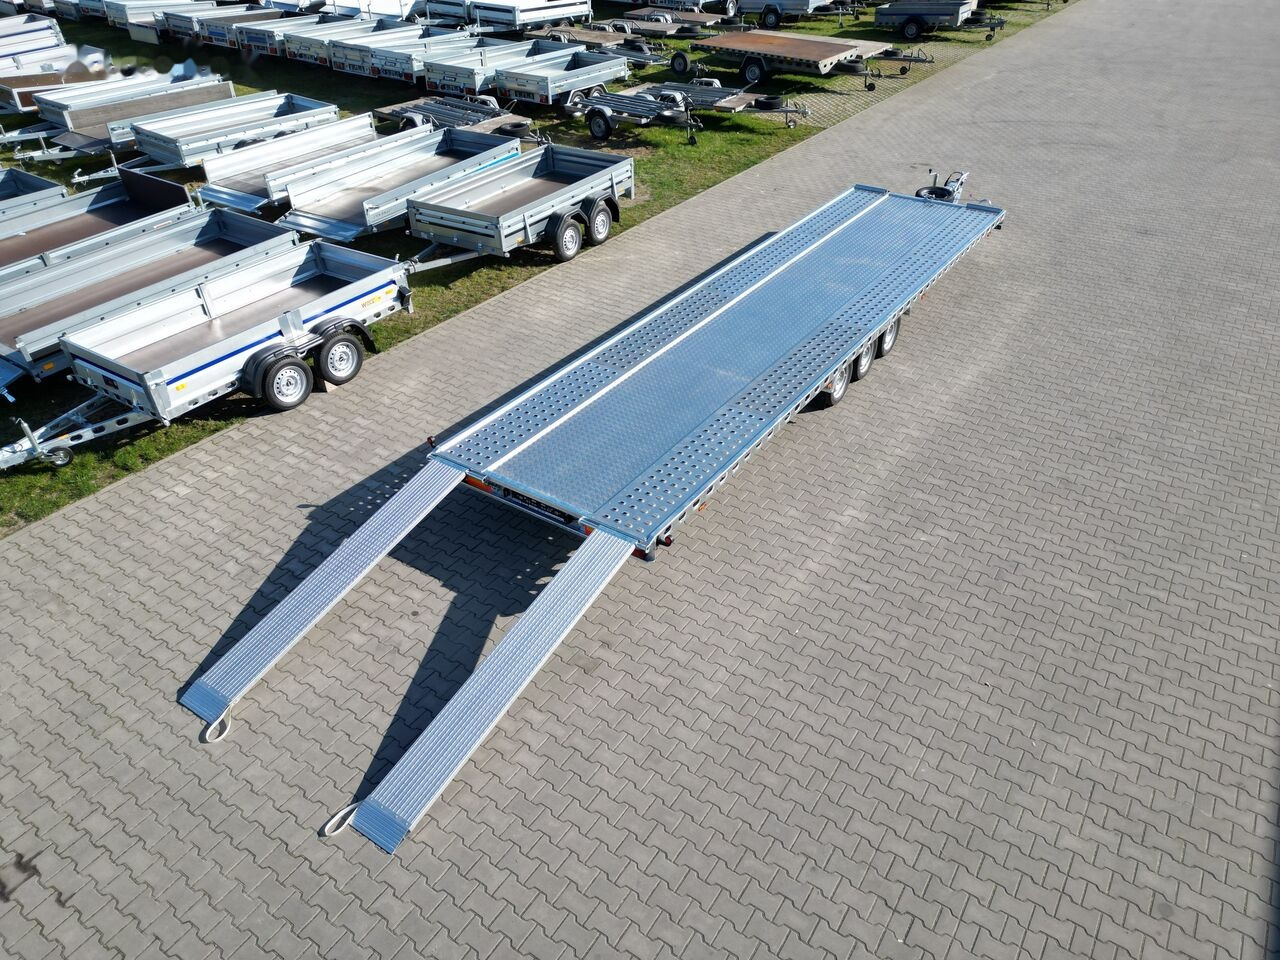 Remorque porte-voitures neuf Wiola L35G85 8.5m long trailer with 3 axles for transport of 2 cars: photos 2